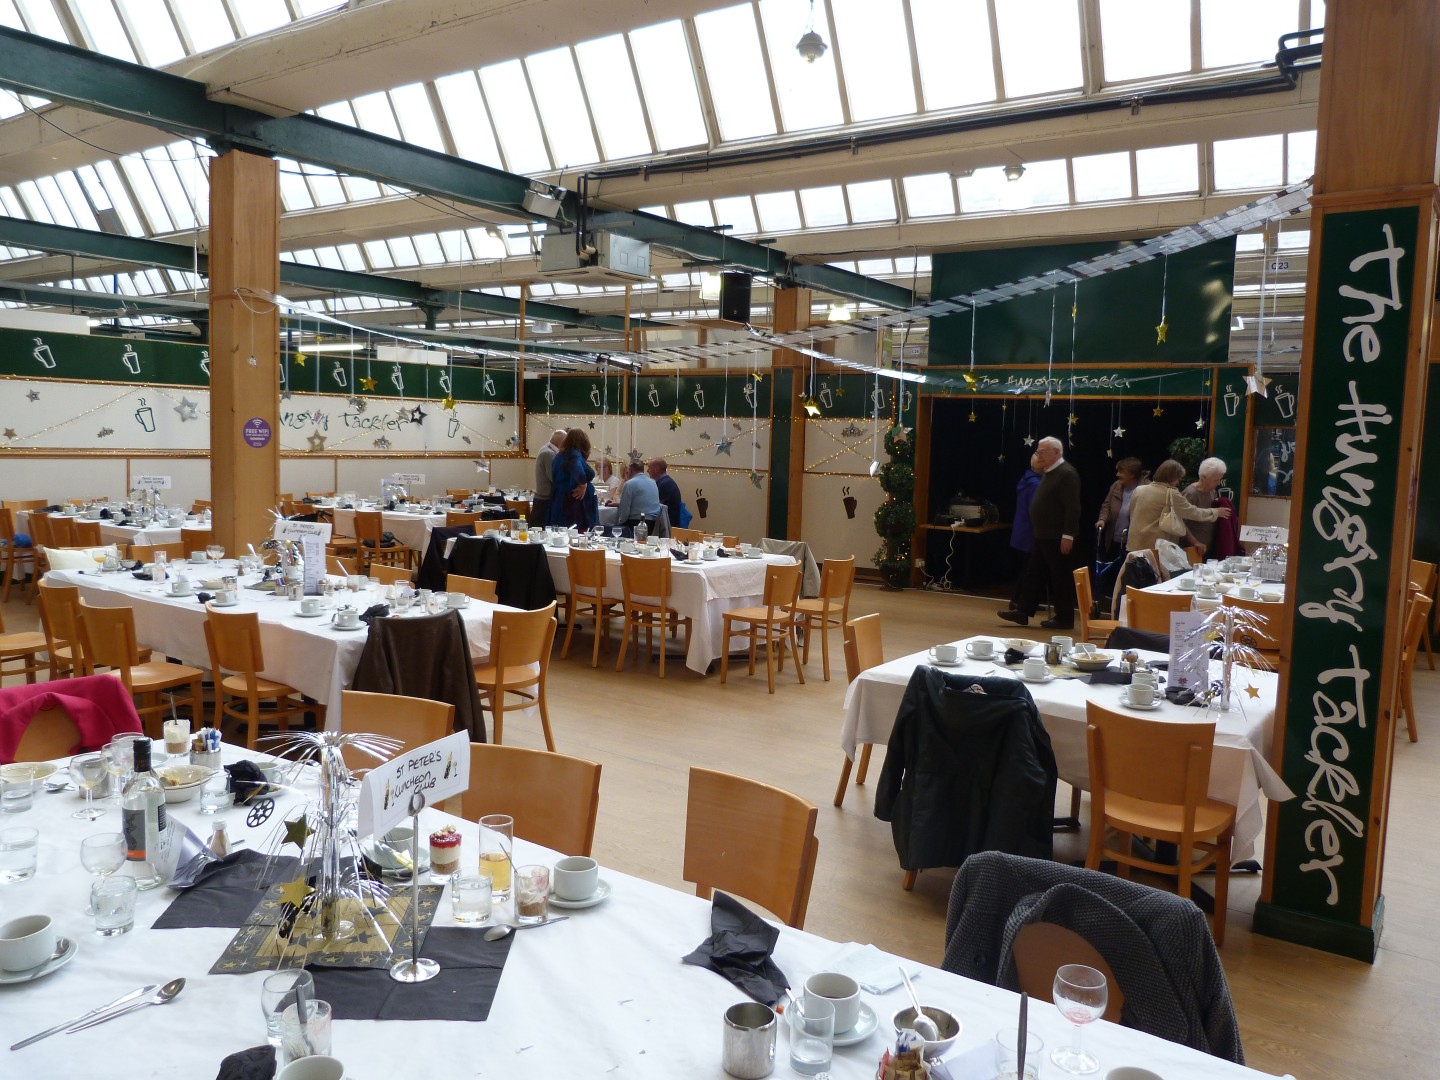 Entertainment Lunch at Oswaldtwistle Mills by Chris Pirolini